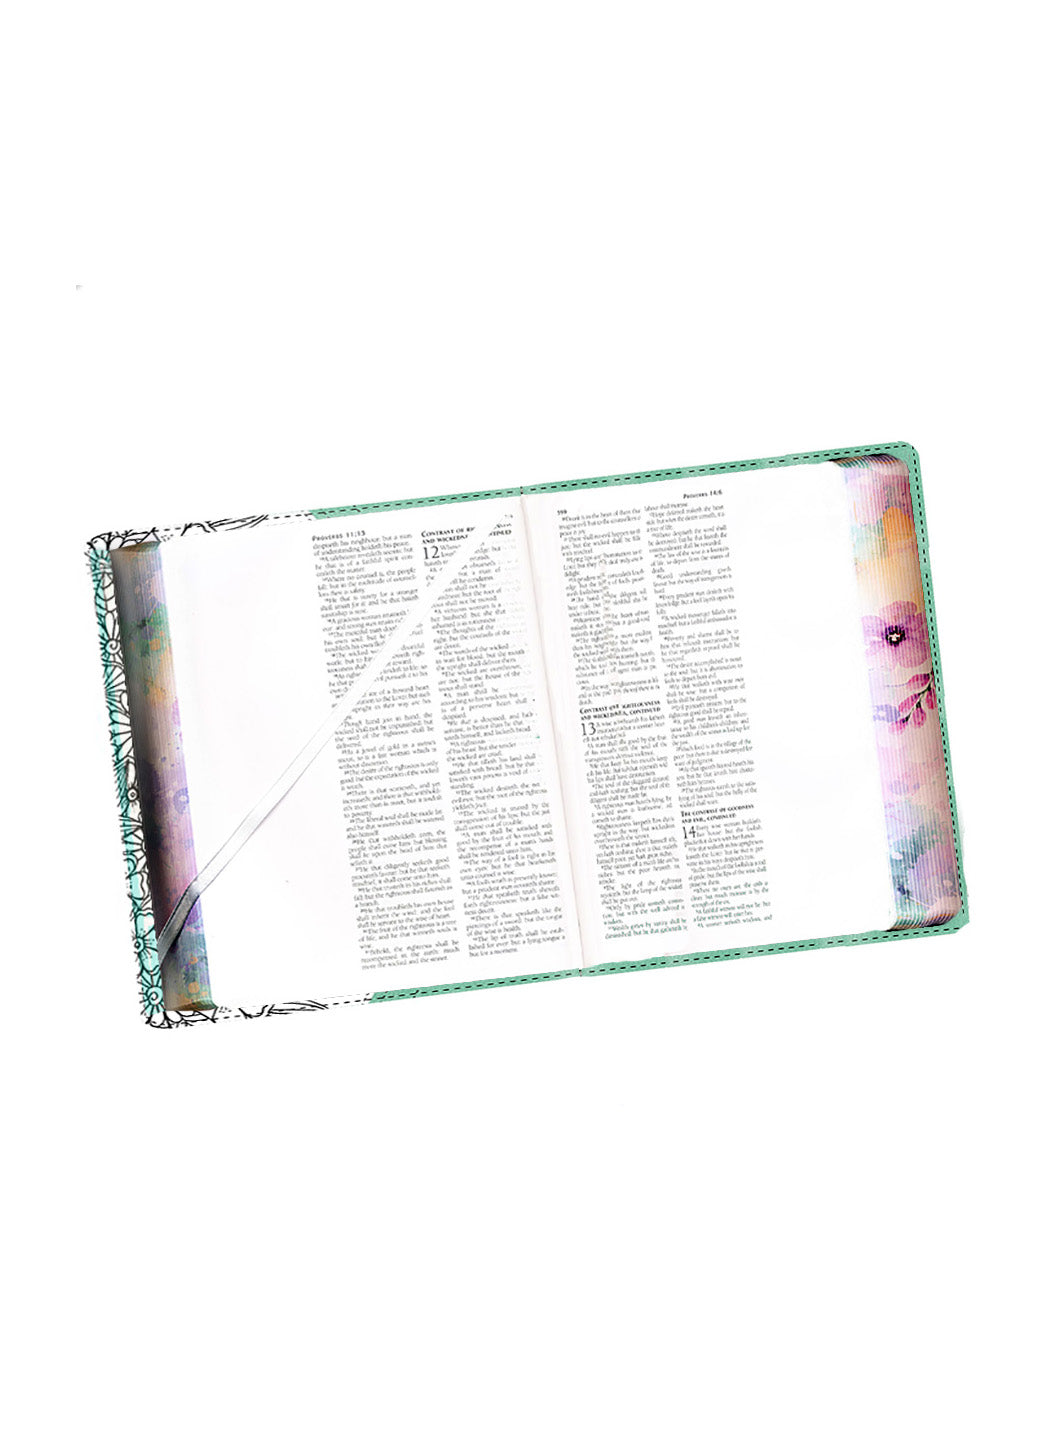 REDIRECTED KJV Teal and White Personal Reflections Home & Lifestyle